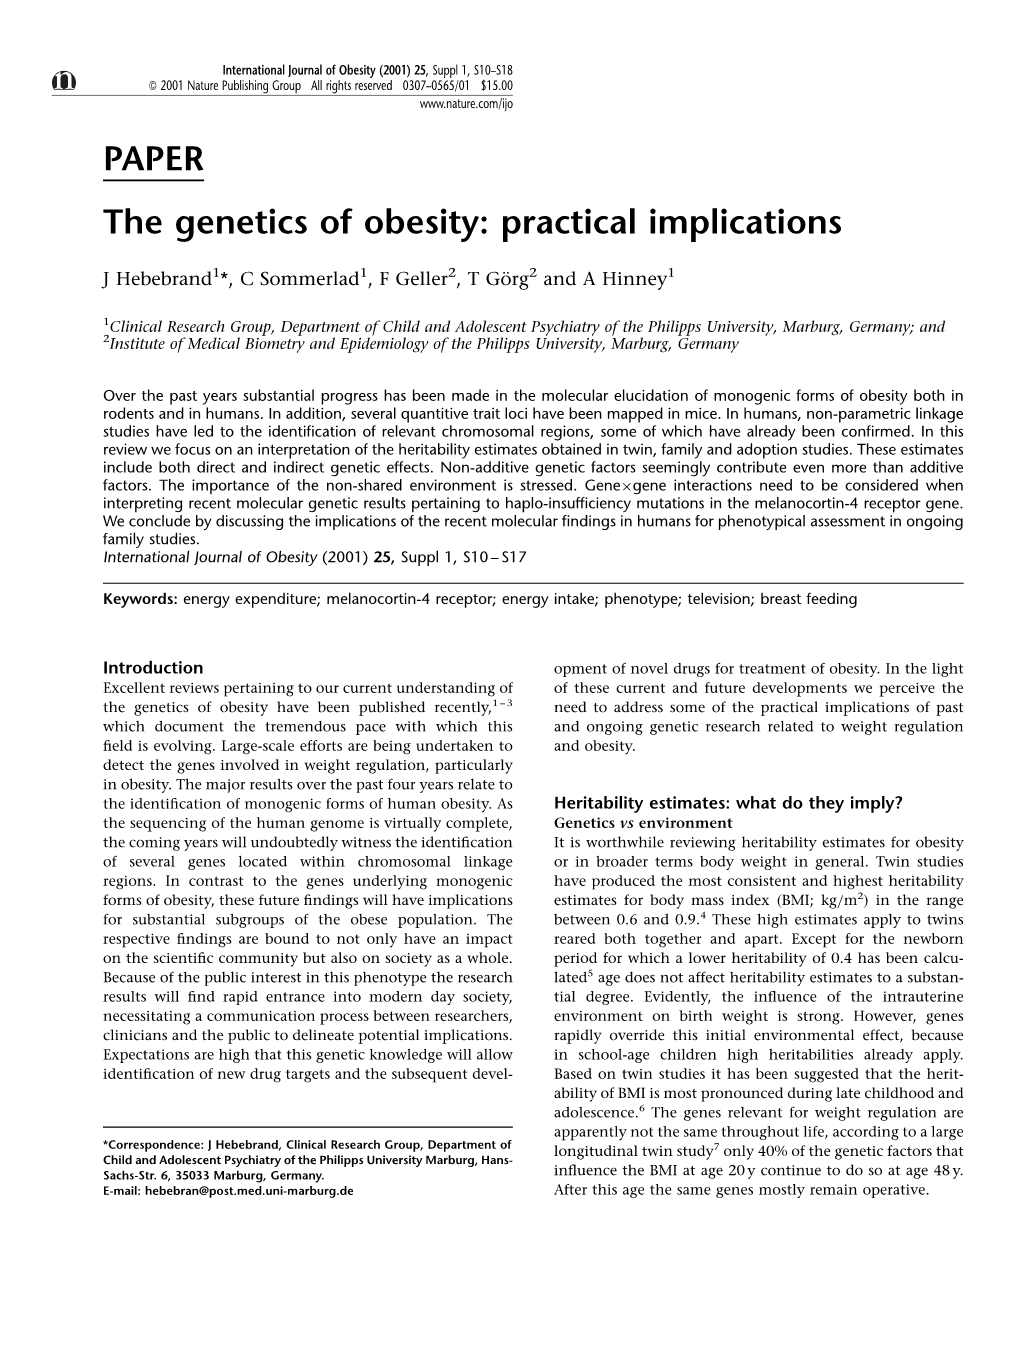 PAPER the Genetics of Obesity: Practical Implications